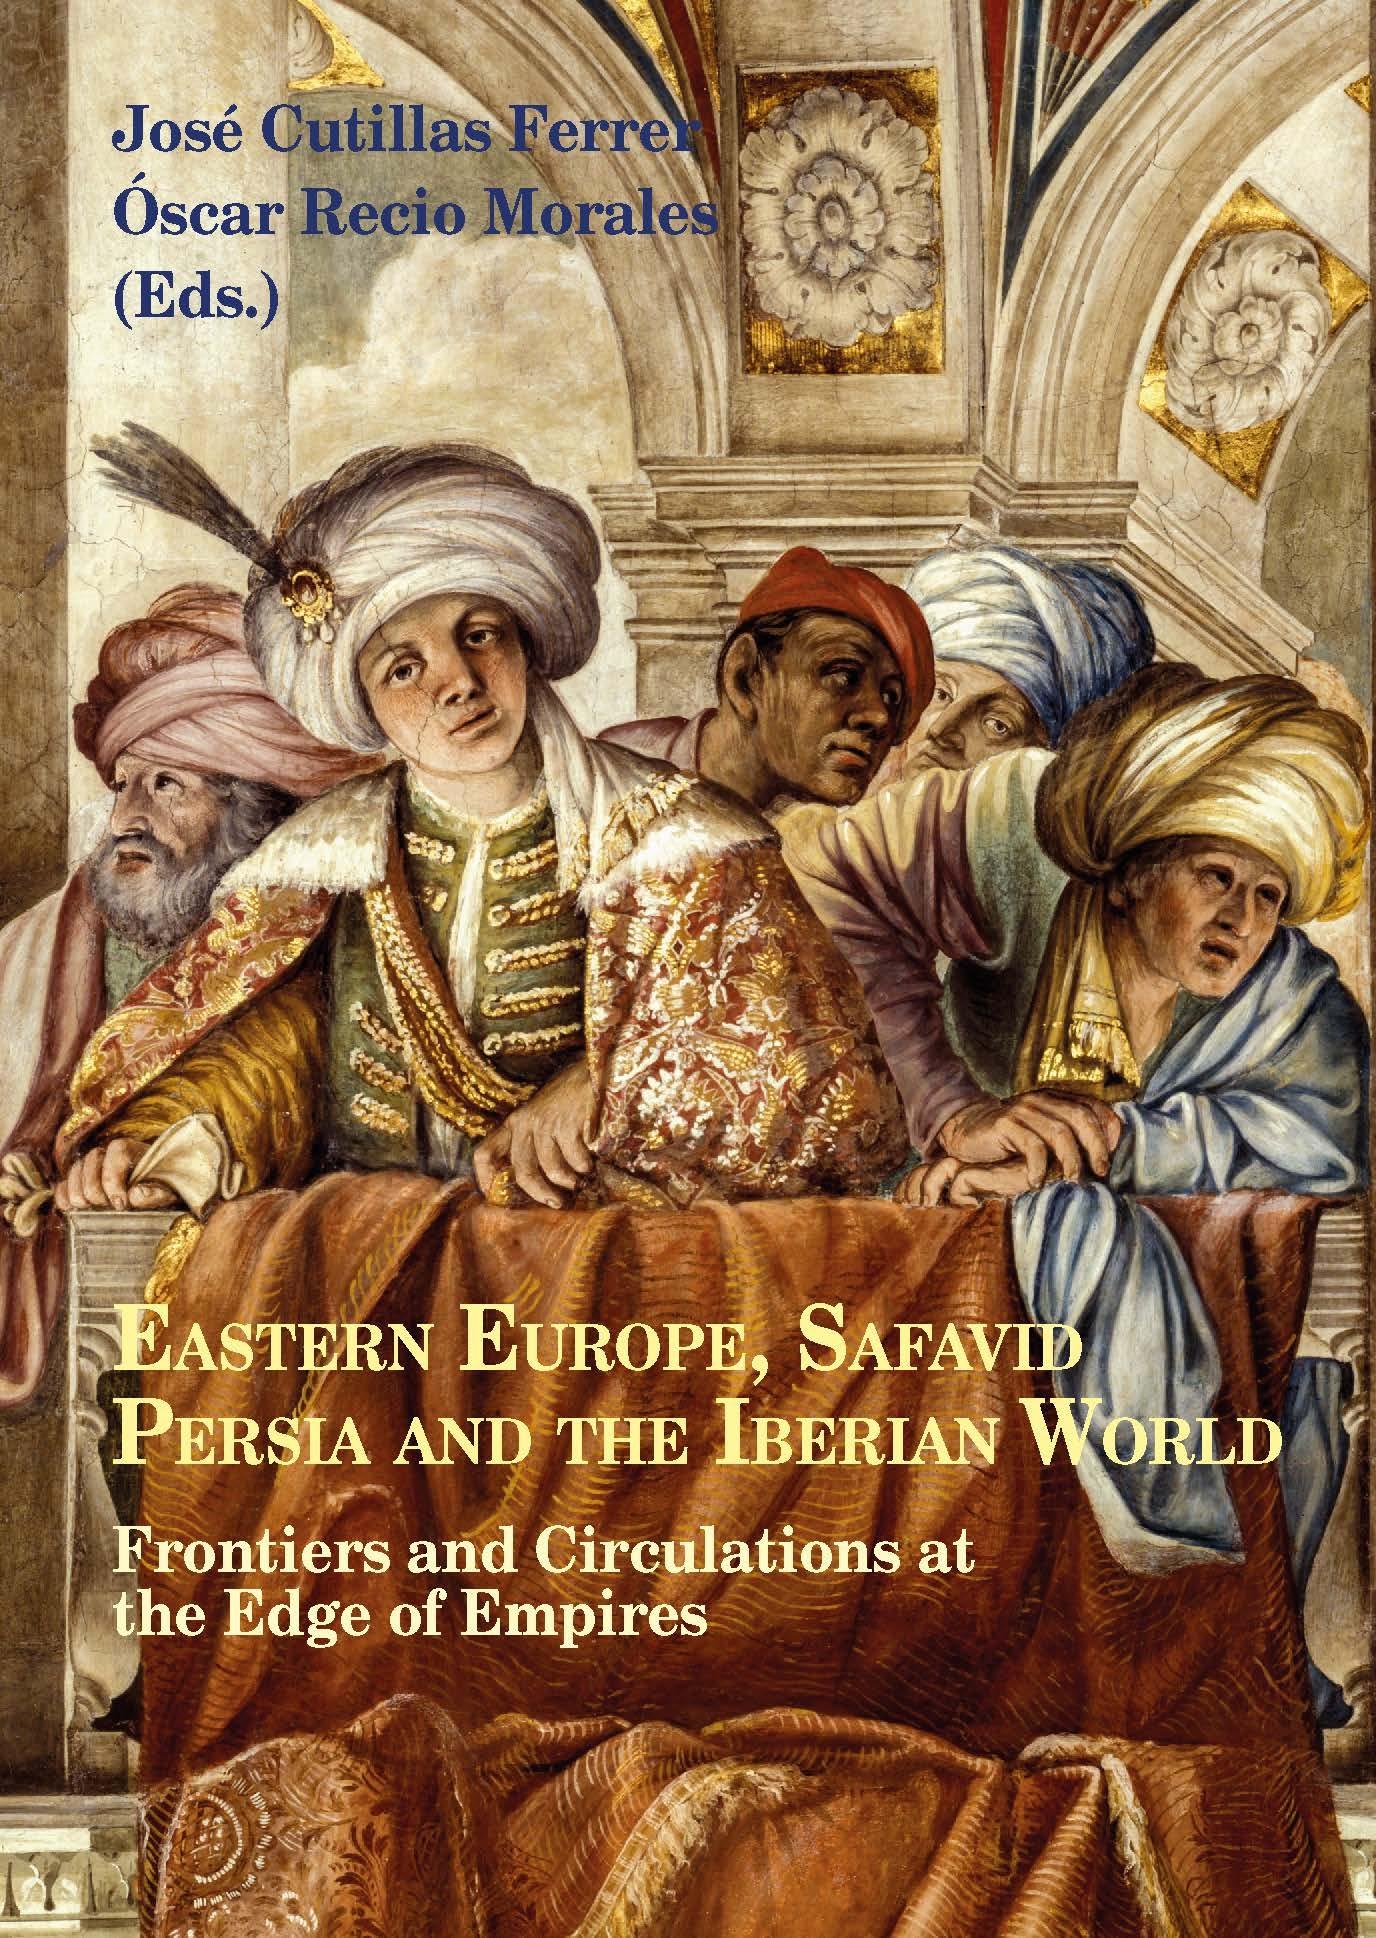 Eastern Europe, Safavid Persia and the Iberian World "Frontiers and Circulations at the Edge of Empires"